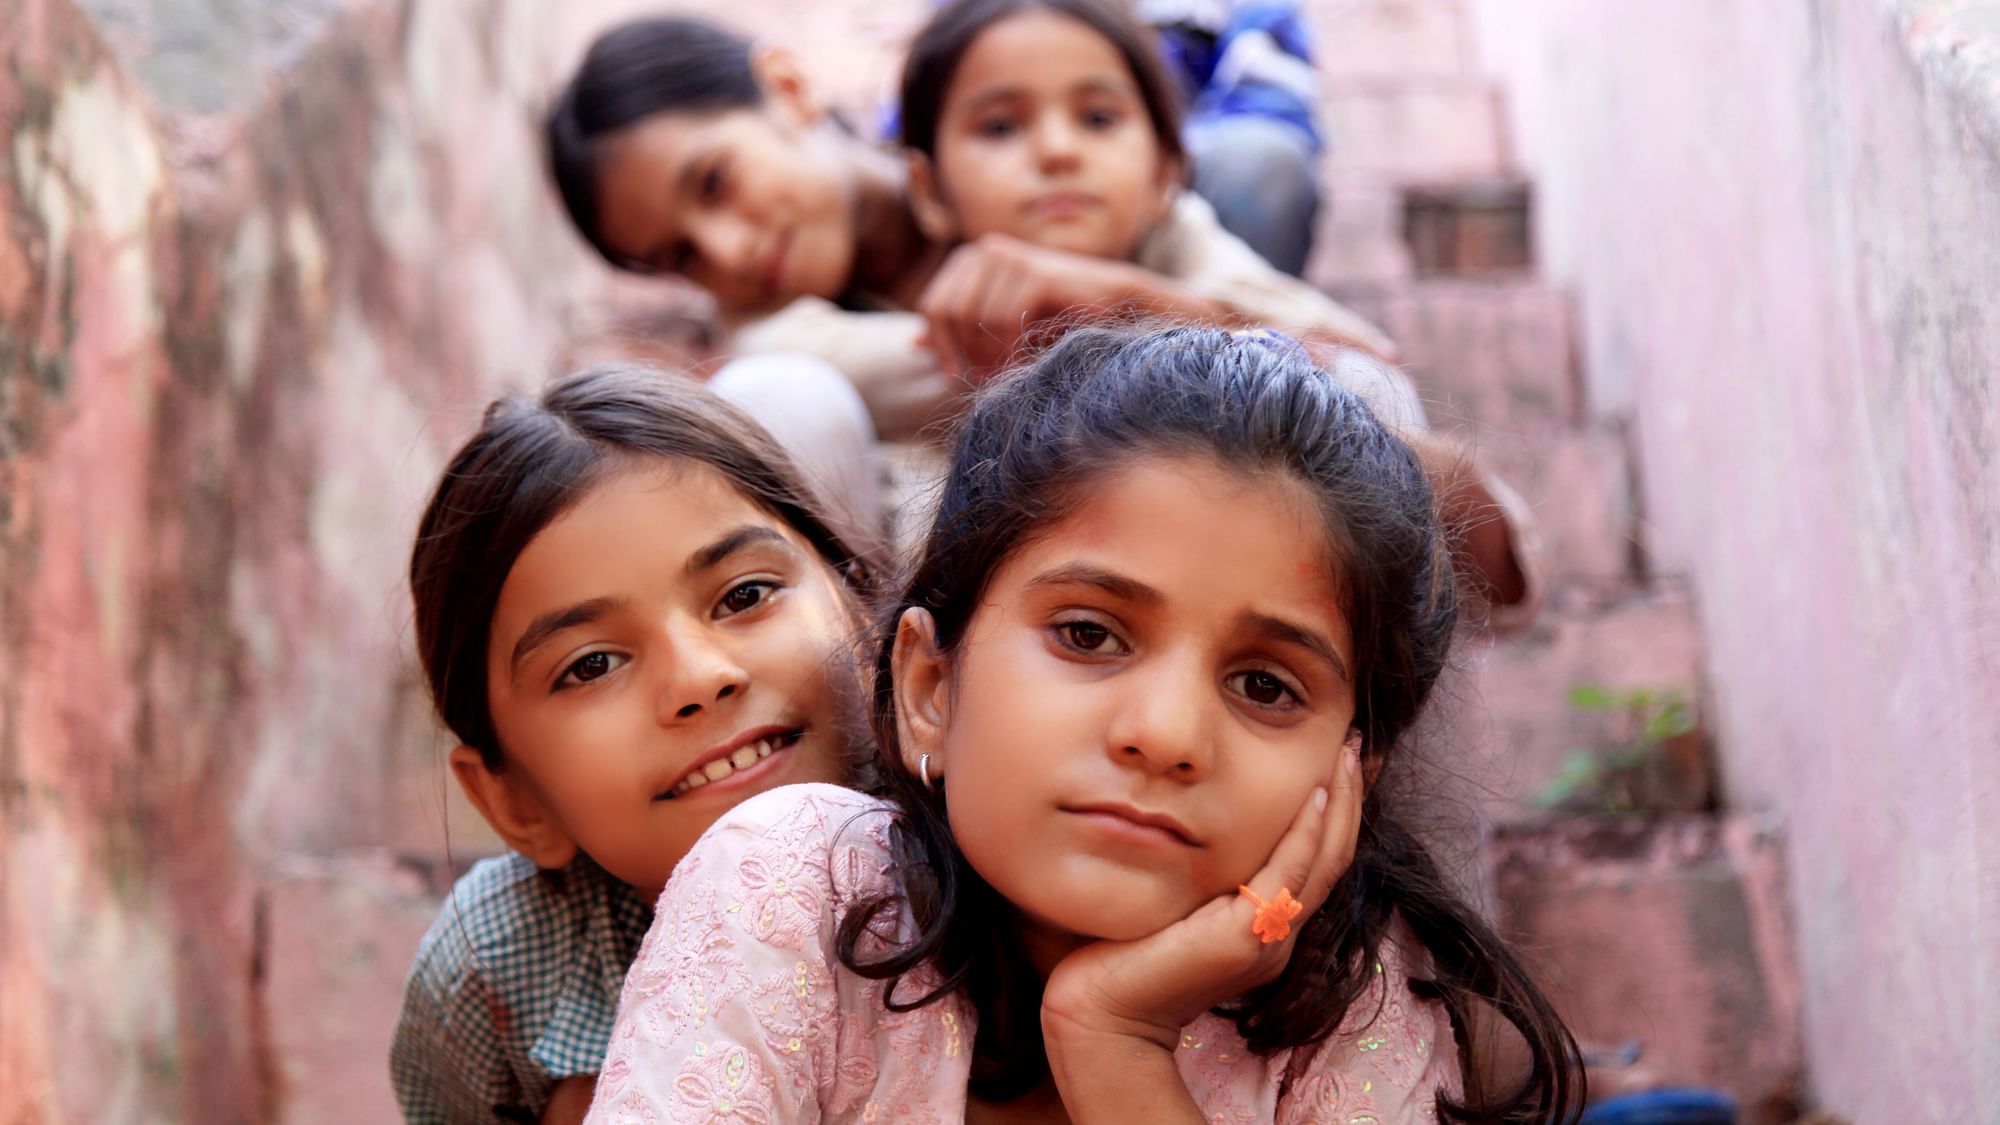 The news of no girls born for three months in Uttarakhand made headlines, but a new survey says 62 girls were born.